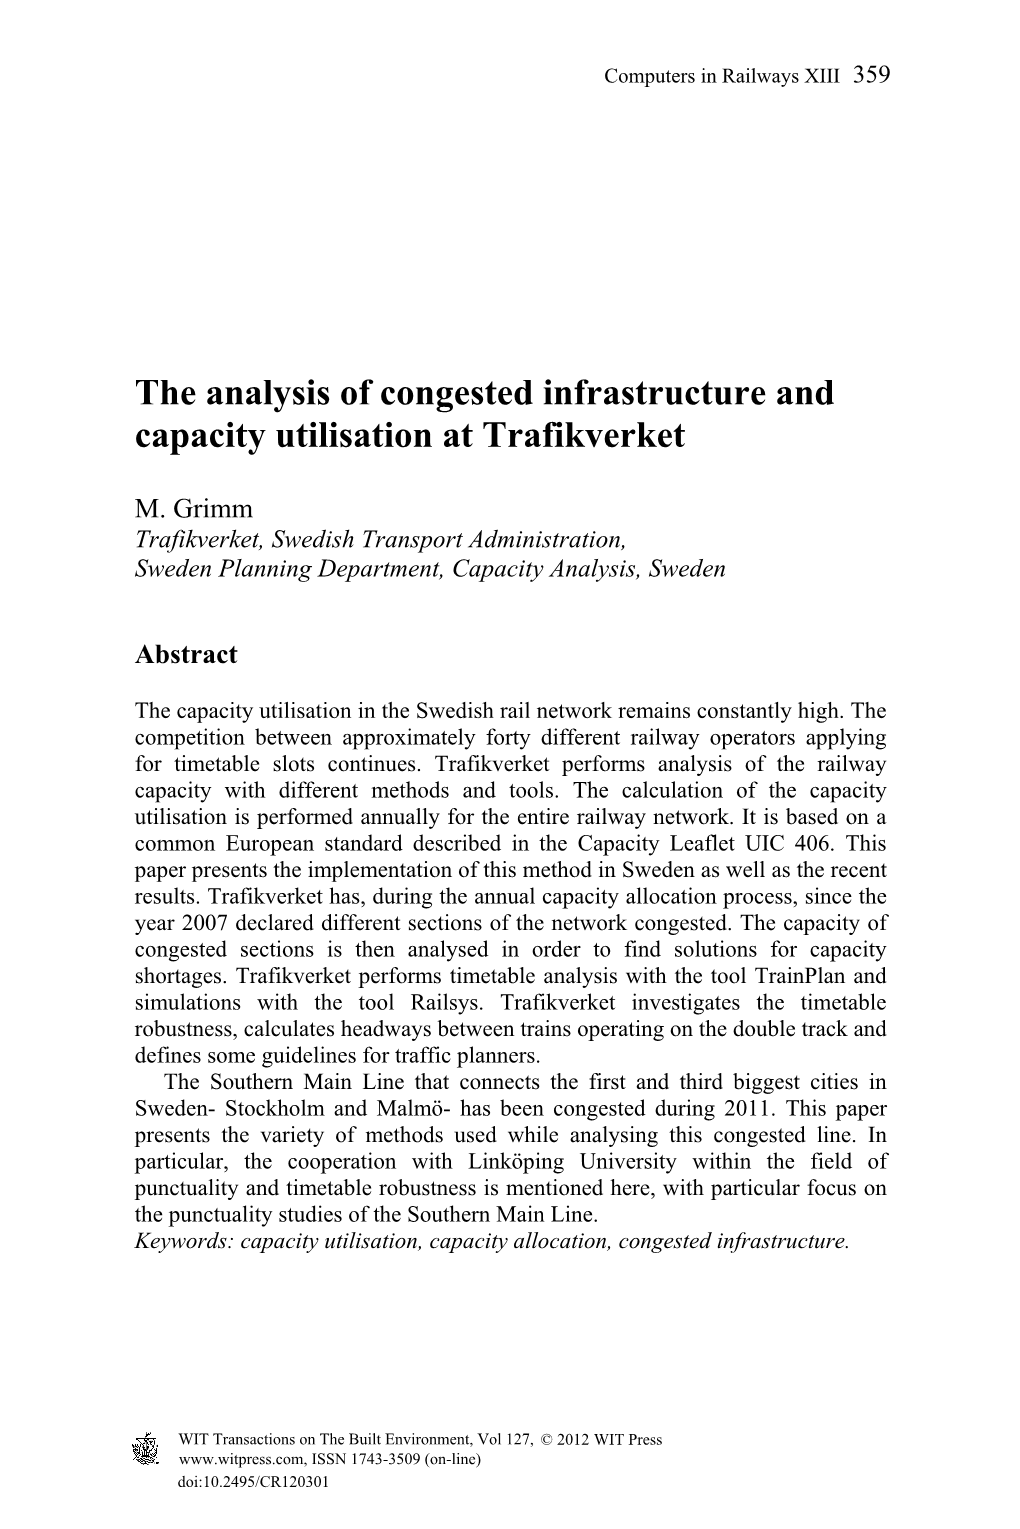 The Analysis of Congested Infrastructure and Capacity Utilisation at Trafikverket